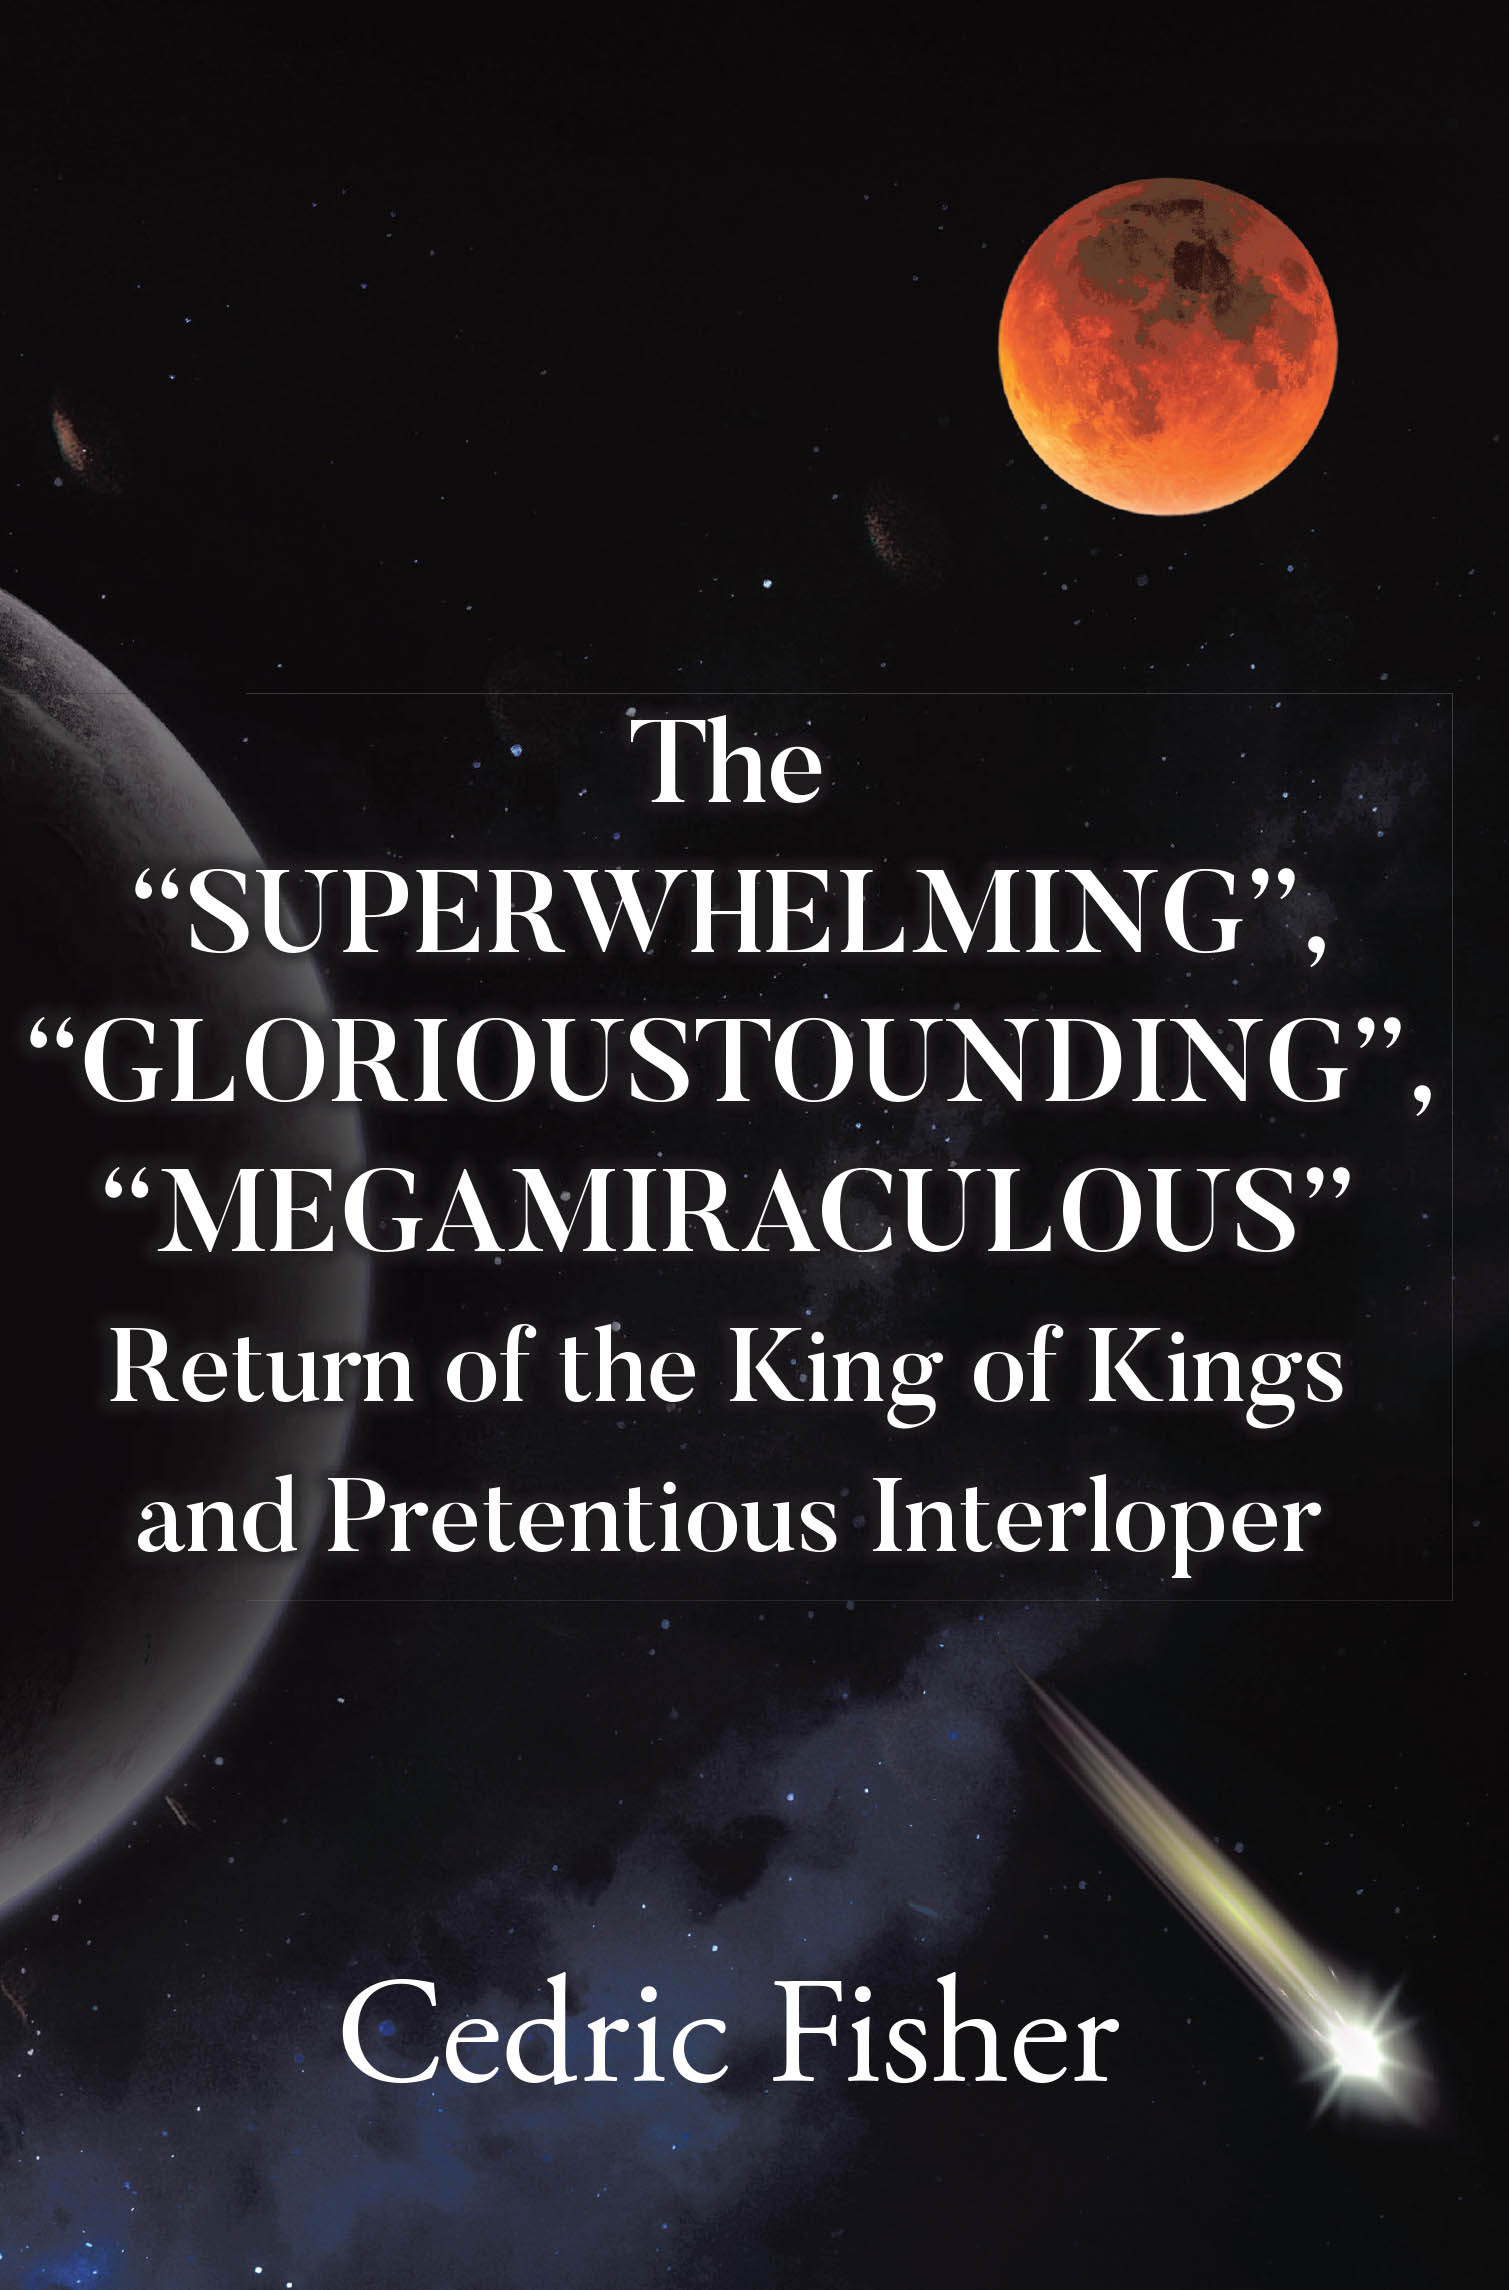 Author Cedric Fisher’s New Book “The ‘Superwhelming’, ‘Glorioustounding’, ‘Megamiraculous’ Return of the King of Kings and Pretentious Interloper” is Released